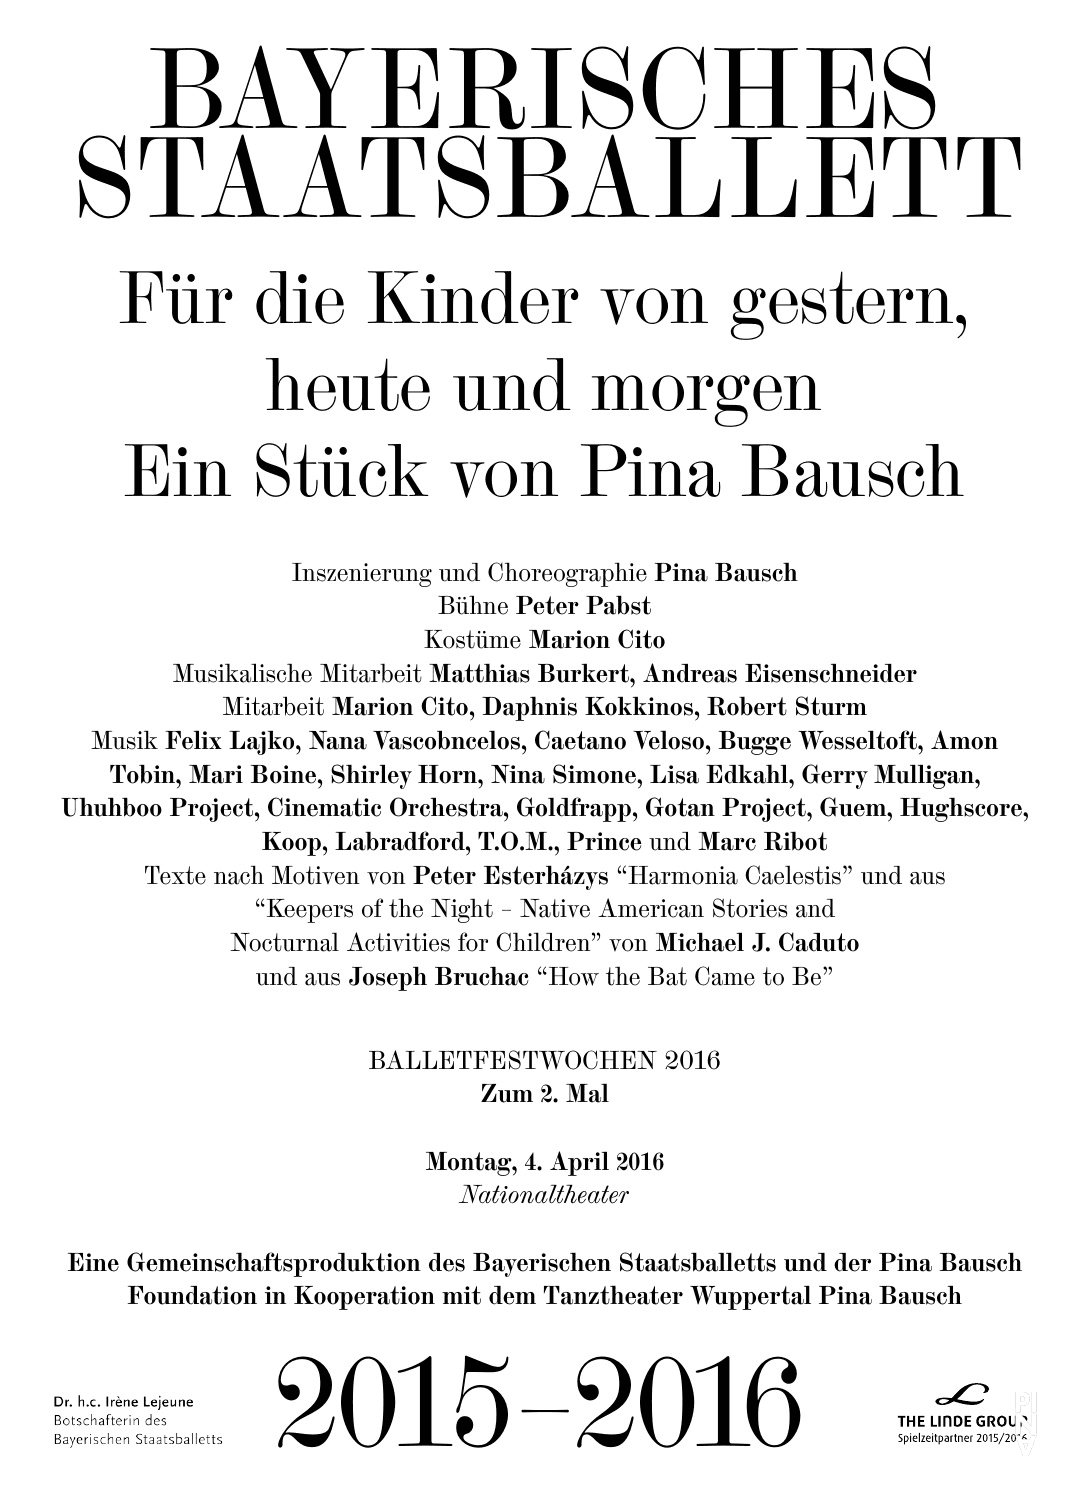 Evening leaflet for “For the Children of Yesterday, Today and Tomorrow” by Pina Bausch with Bayerisches Staatsballett in in Munich, April 4, 2016